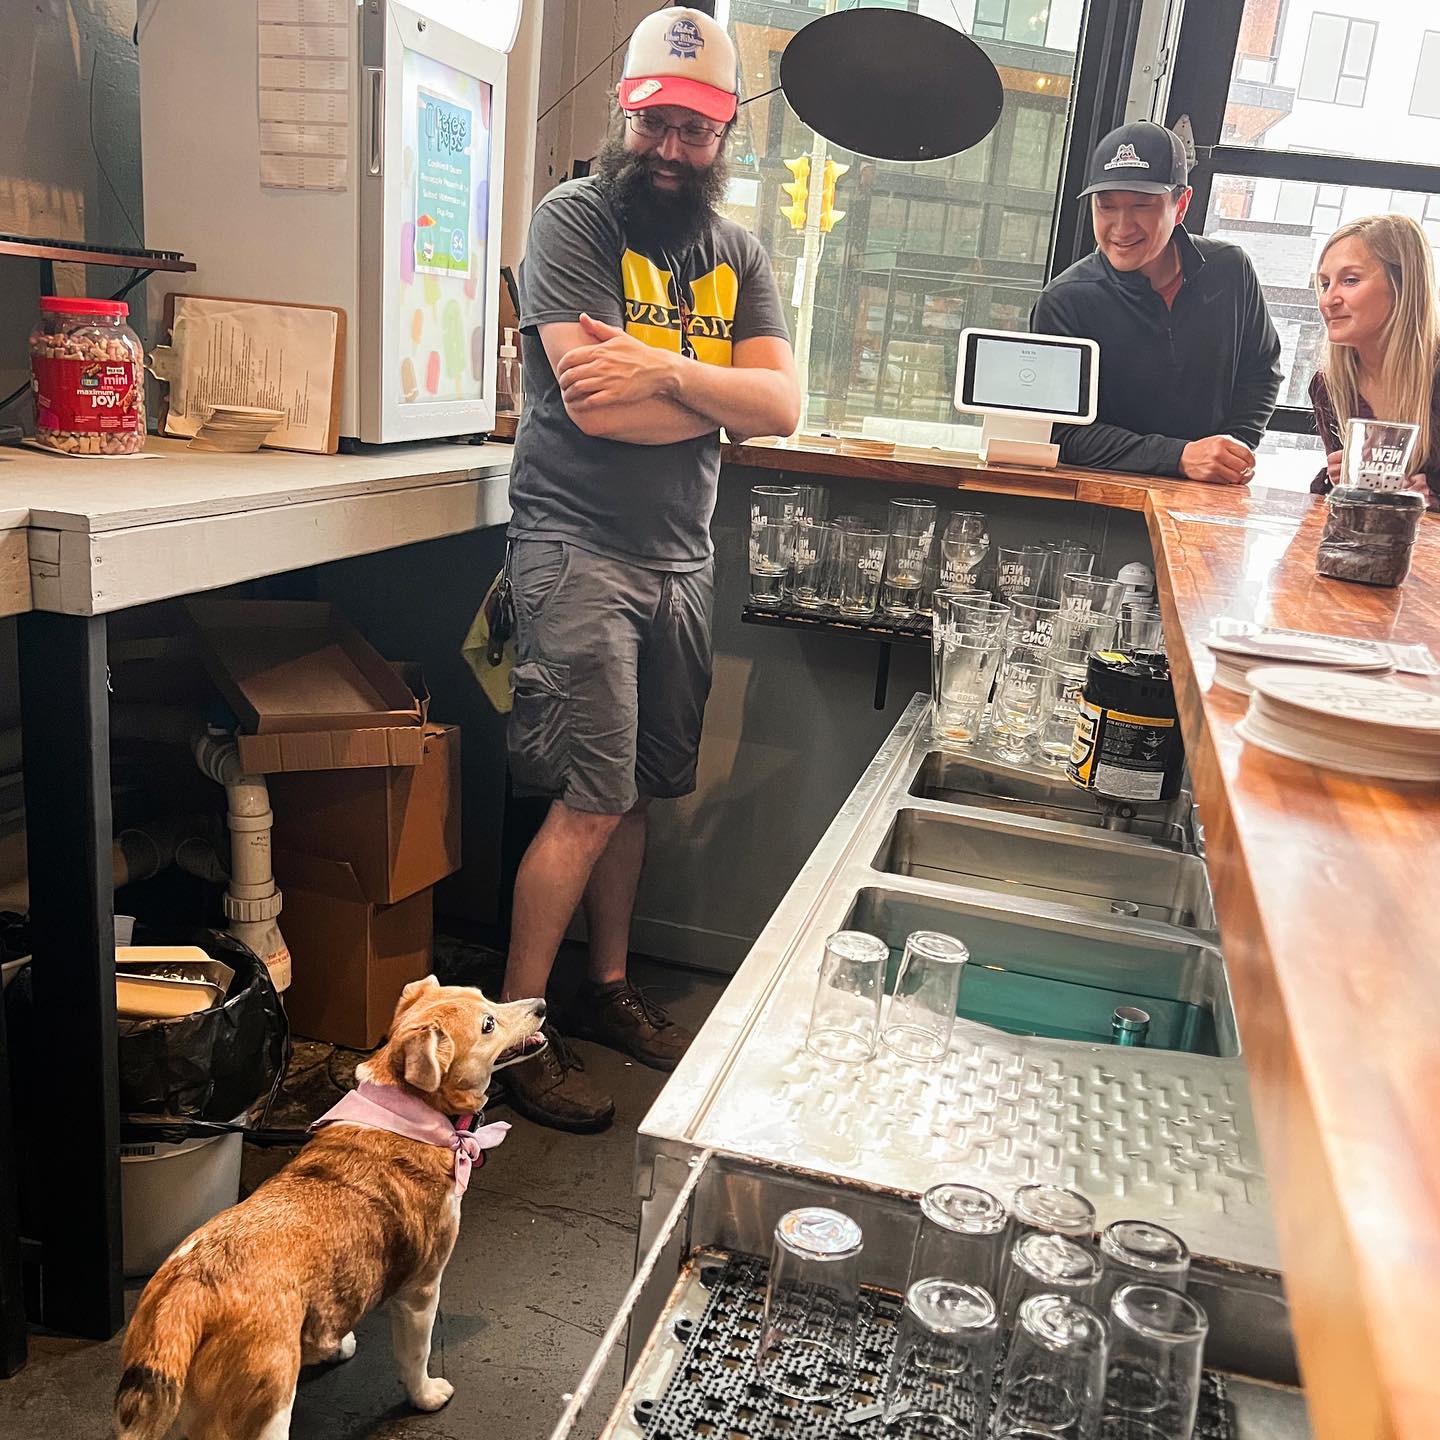 People allowed behind the bar:
✅Beertenders
✅Brewery Employees
✅Riley

Hey, did you guys hear?! @rileysandwich is coming to the Third ward and they have a soft opening tonight until 9!🐶 We are really excited for our friends and member-owners to have expanded their business and passion for making delicious food. Can’t wait to check out the new digs!🤘🏼